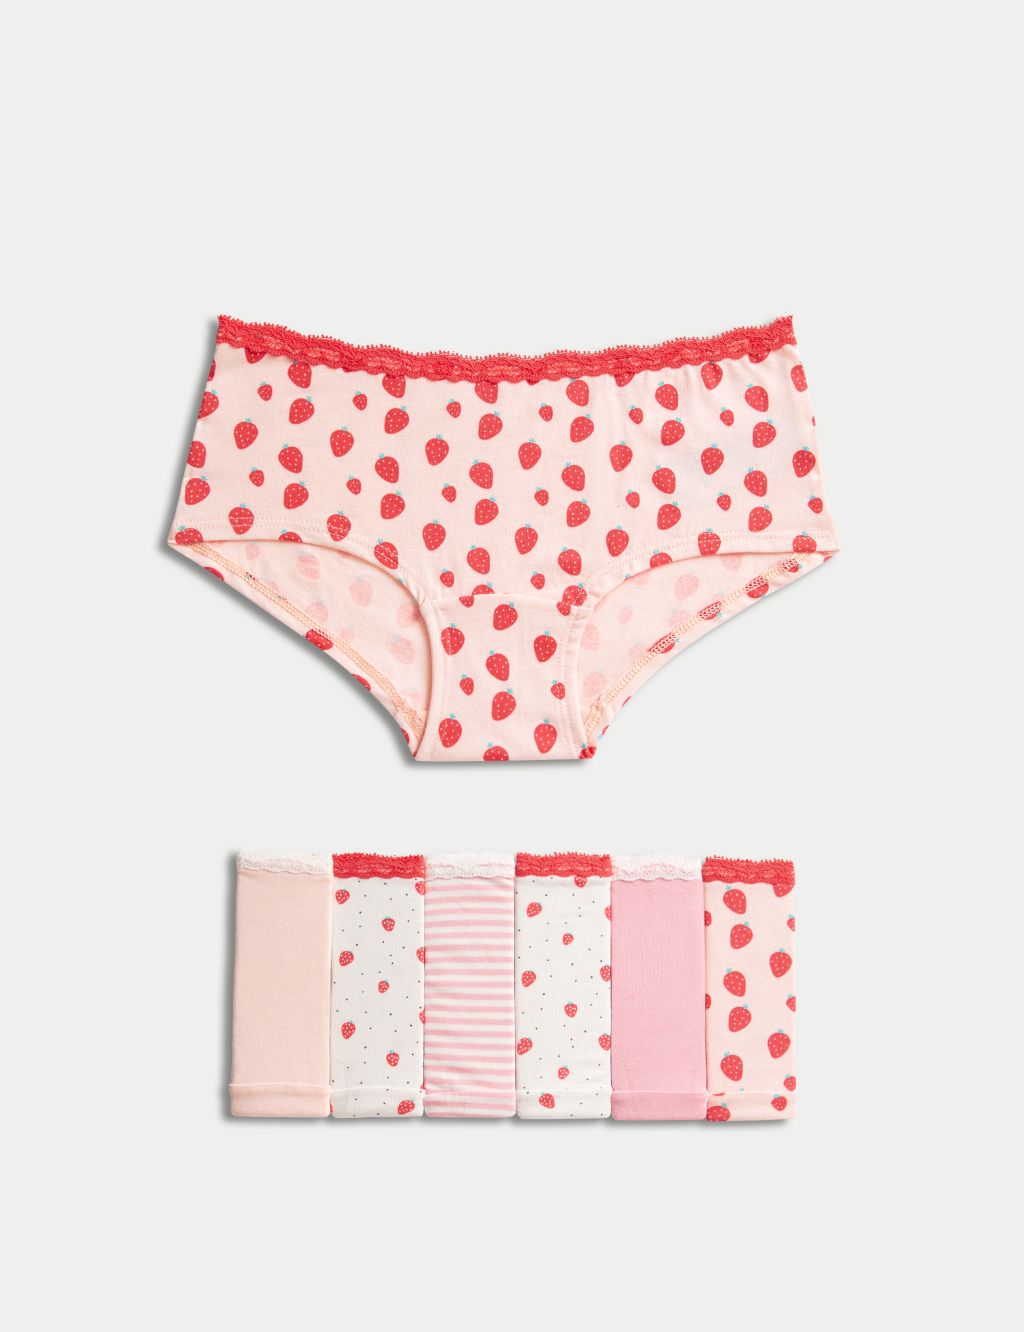 2 pcs of Set Sminie Young Girl Panties Underwear Students Panty